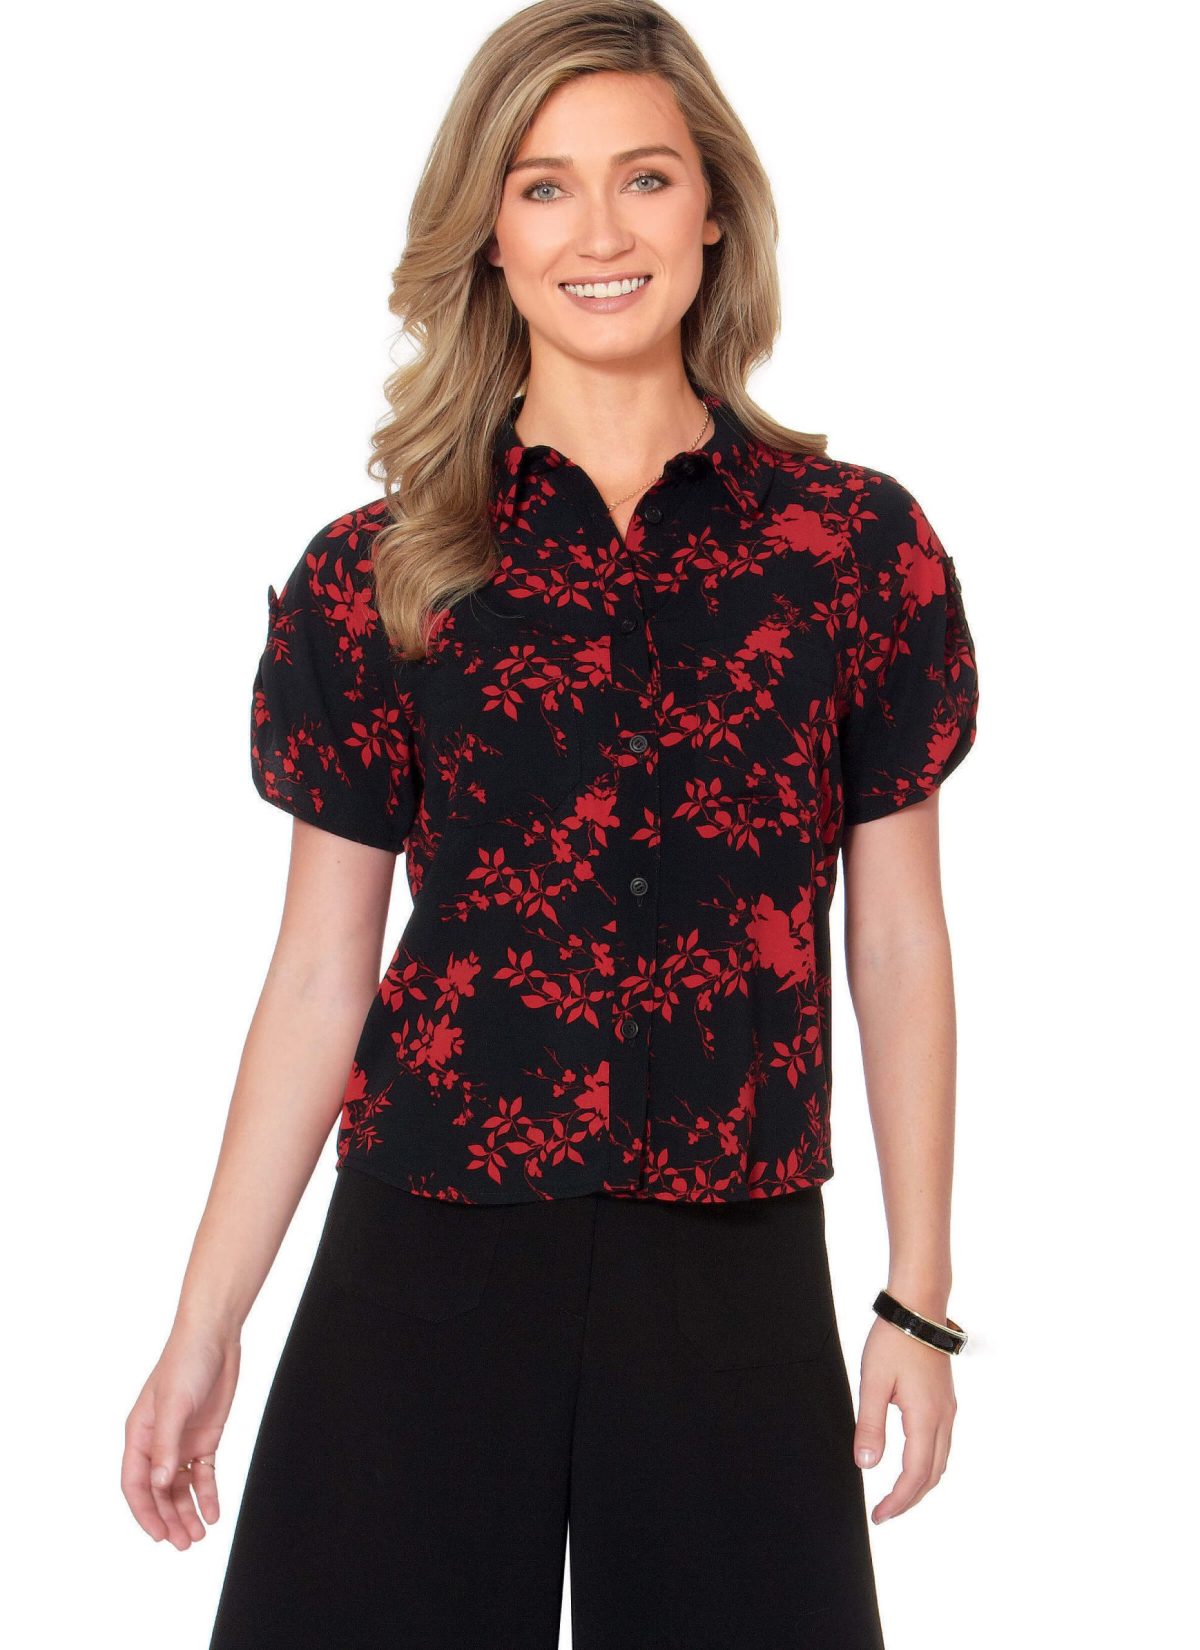 McCall's Sewing Pattern M7472 Misses' Raglan Sleeve, Button-Down Shirts and Tunics